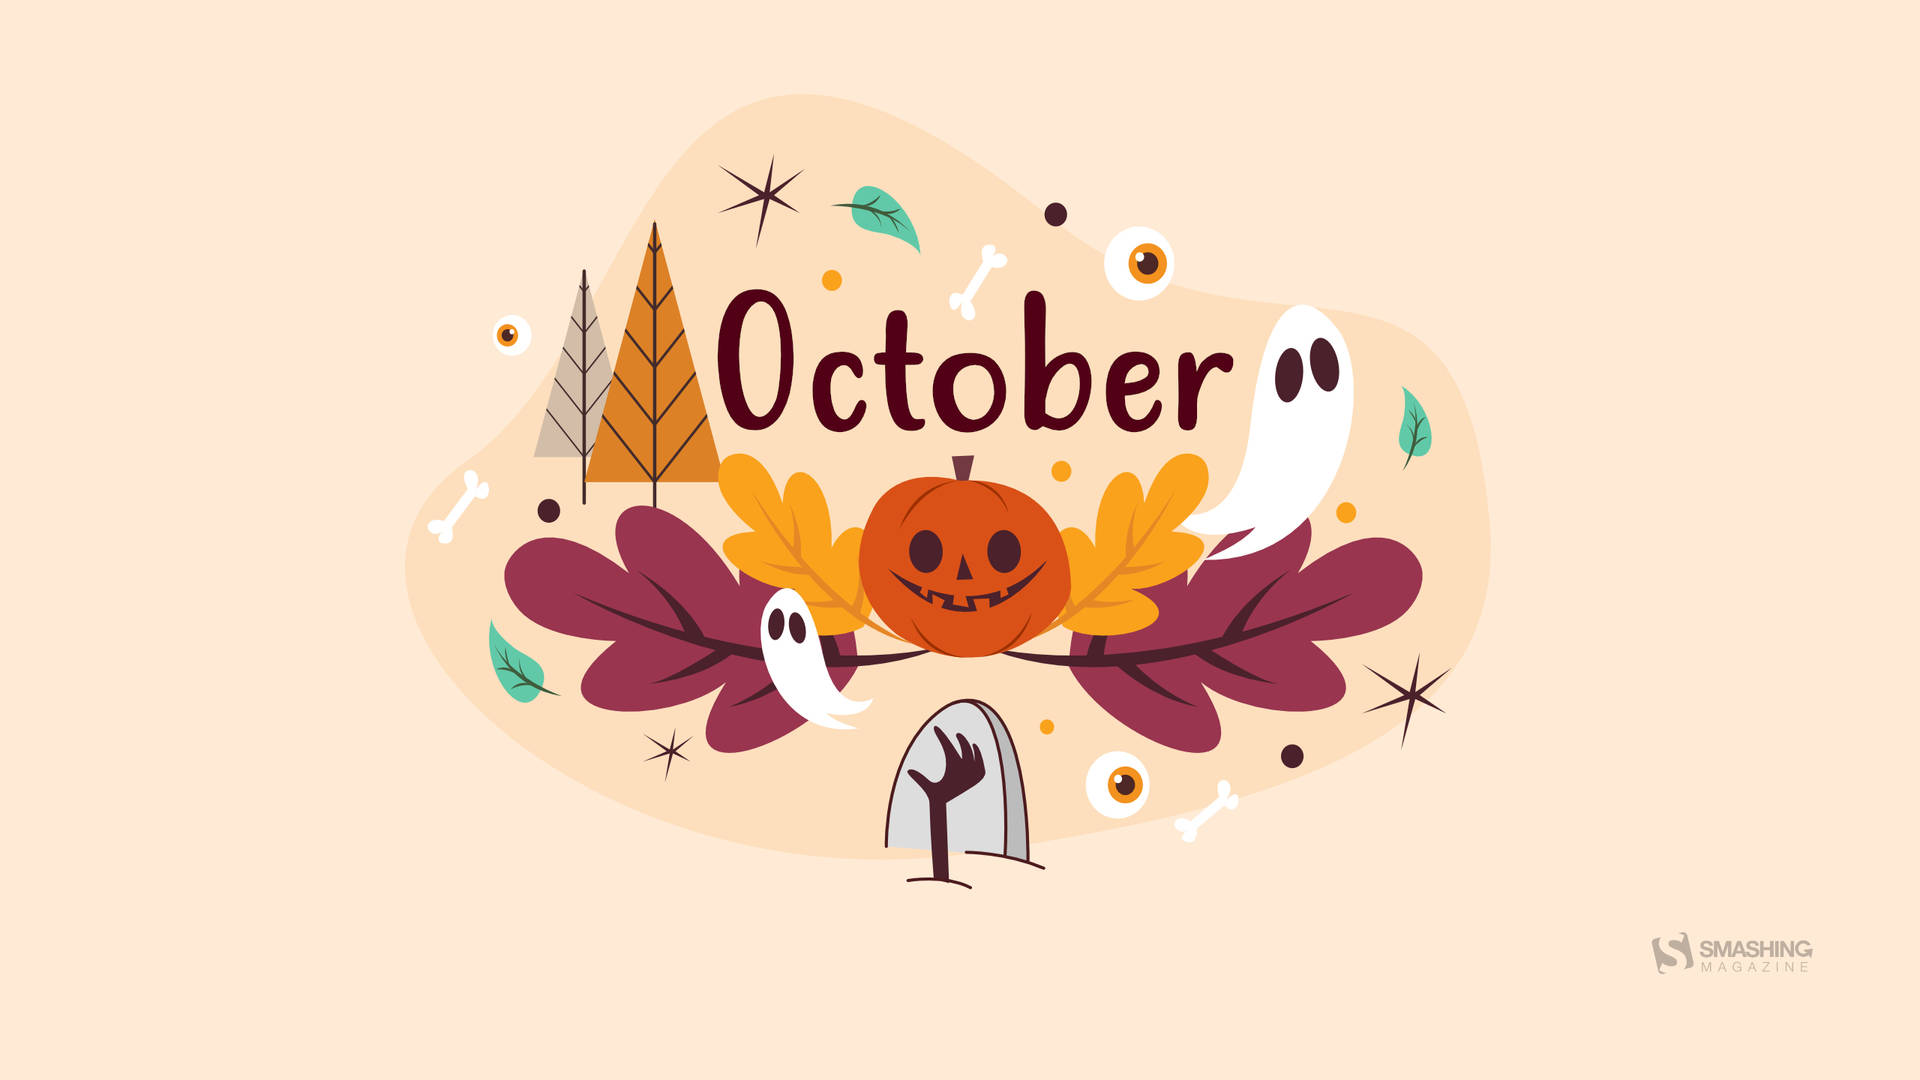 October means pumpkin picking and family fun! Wallpaper